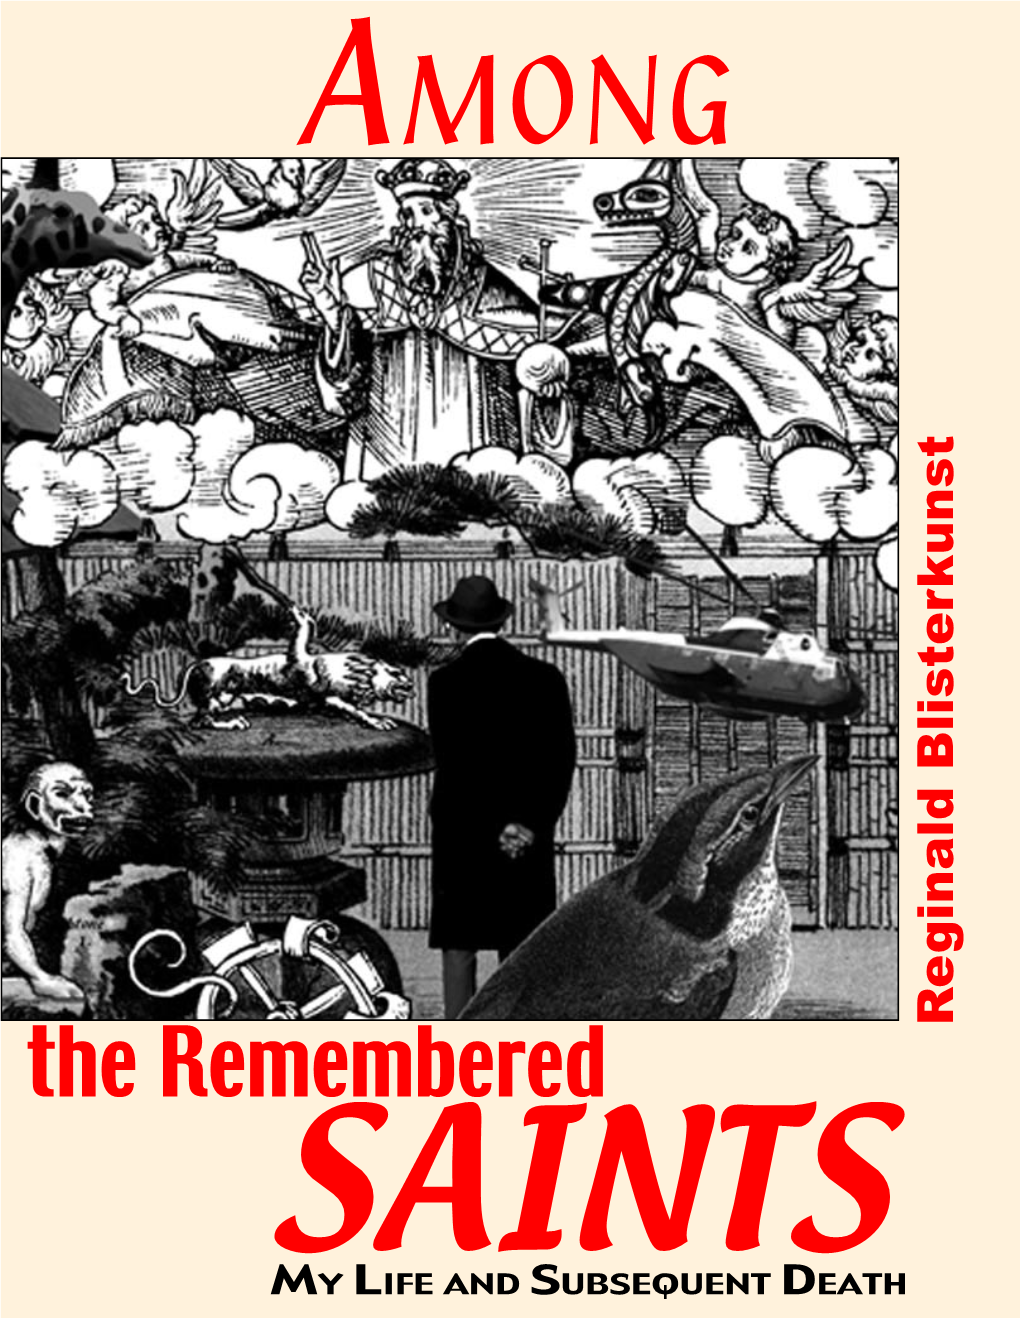 The Remembered SAINTS MY LIFE and SUBSEQUENT DEATH AMONG the REMEMBERED SAINTS: MY LIFE and SUBSEQUENT DEATH by Reginald Blisterkunst, Ph.D